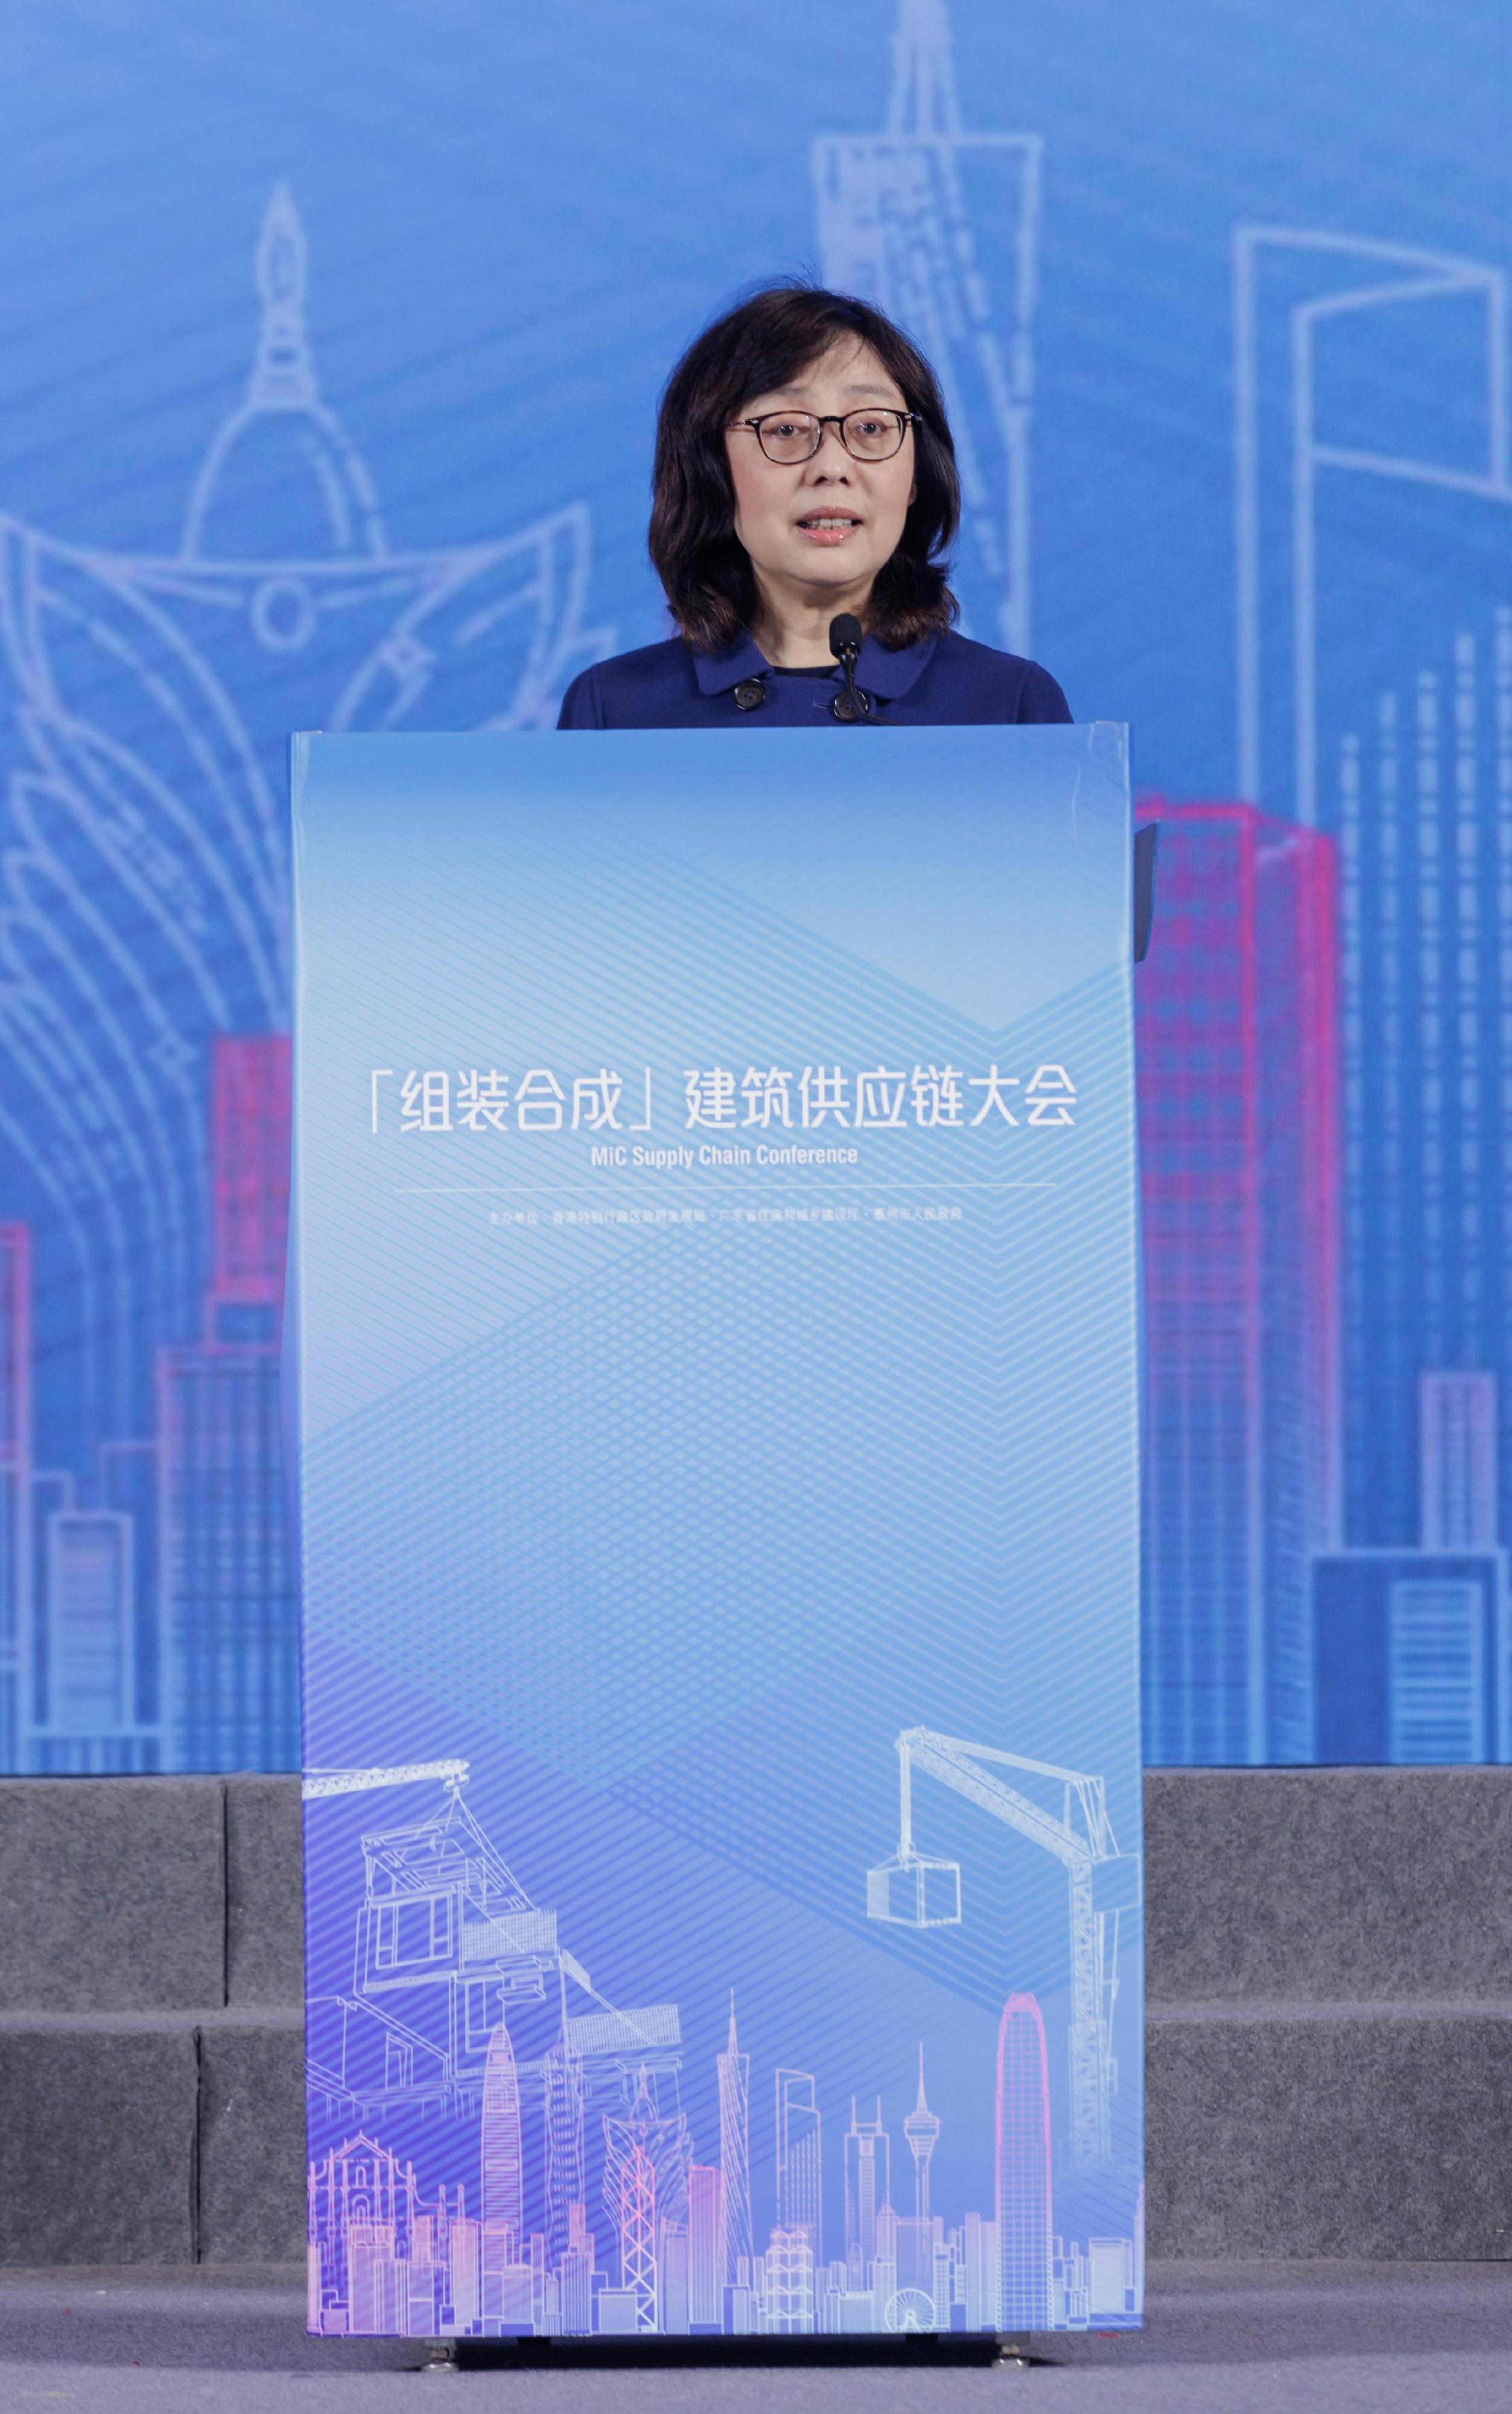 The Secretary for Development, Ms Bernadette Linn, attended the Modular Integrated Construction Supply Chain Conference in Huizhou today (January 23). Photo show Ms Linn speaking at the opening ceremony.